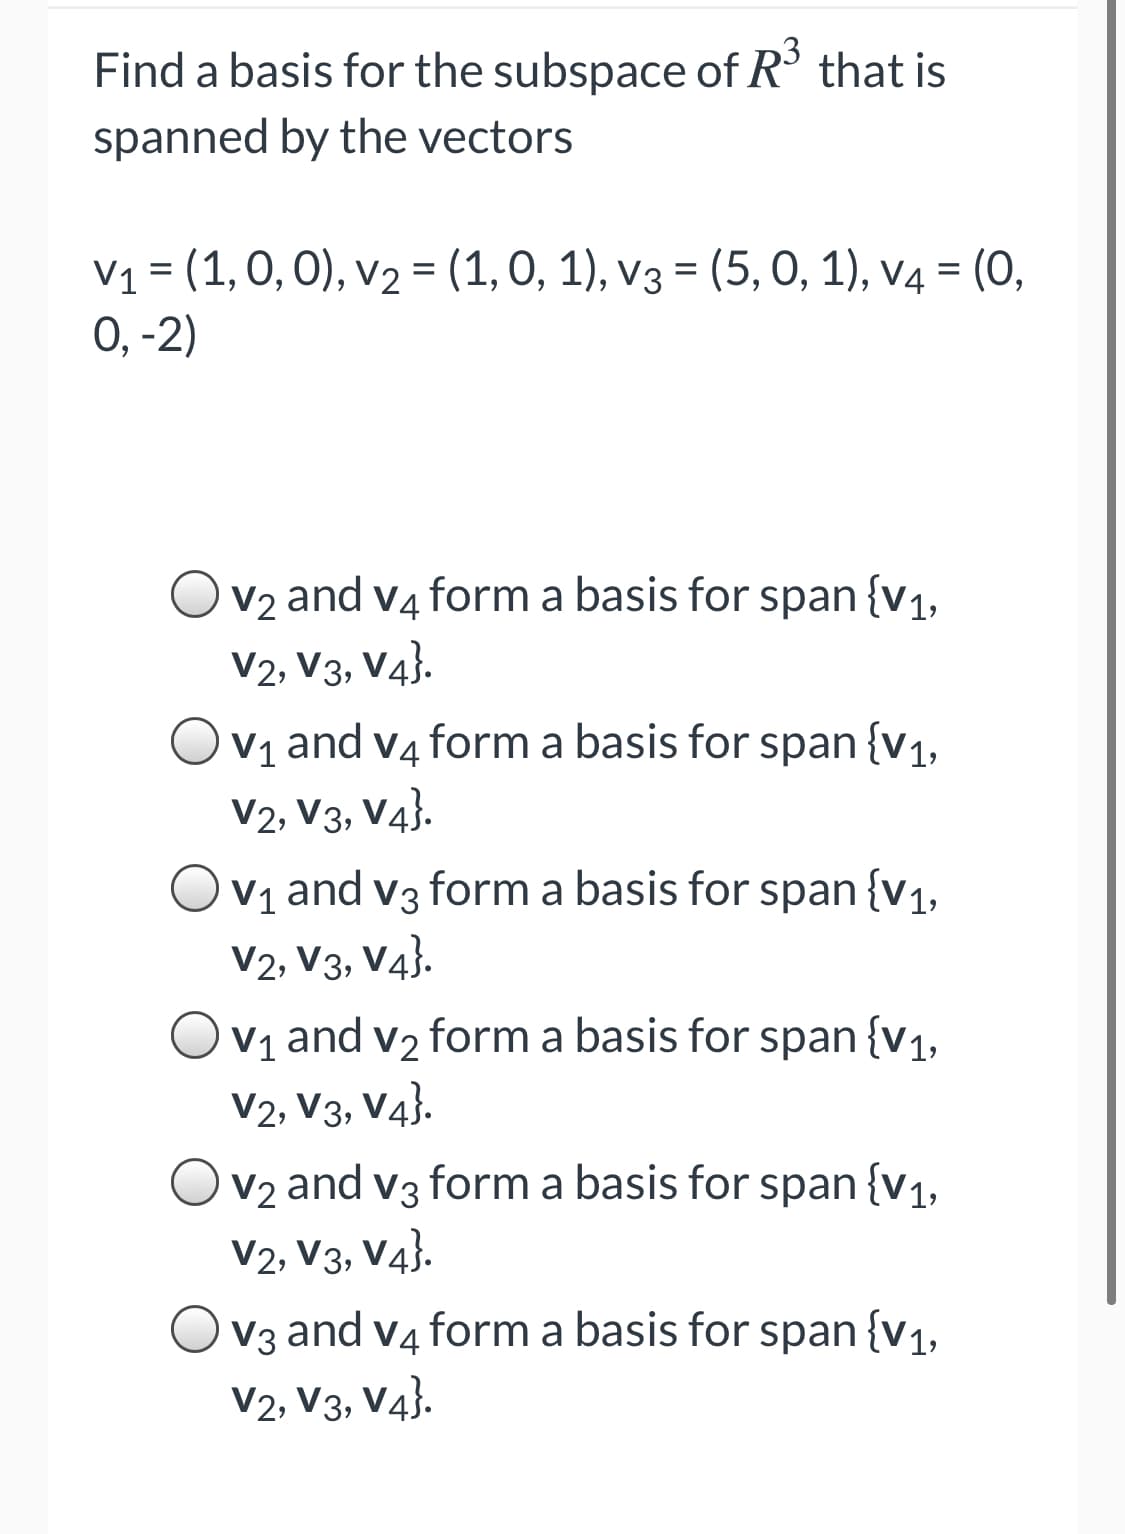 Find a basis for the subspace of R° that is
spanned by the vectors
V1 = (1, 0, 0), v2 = (1, 0, 1), v3 = (5, 0, 1), v4 = (0,
0, -2)
V2 and v4 form a basis for span {v1,
V2, V3, V4}.
V1 and v4 form a basis for span {v1,
V2, V3, V4}.
V1 and v3 form a basis for span {v1,
V2, V3, V4}.
Ov1 and v2 form a basis for span {v1,
V2, V3, V4}.
V2 and v3 form a basis for span {v1,
V2, V3, V4}.
V3 and v4 form a basis for span {v1,
V2, V3, V4}.
